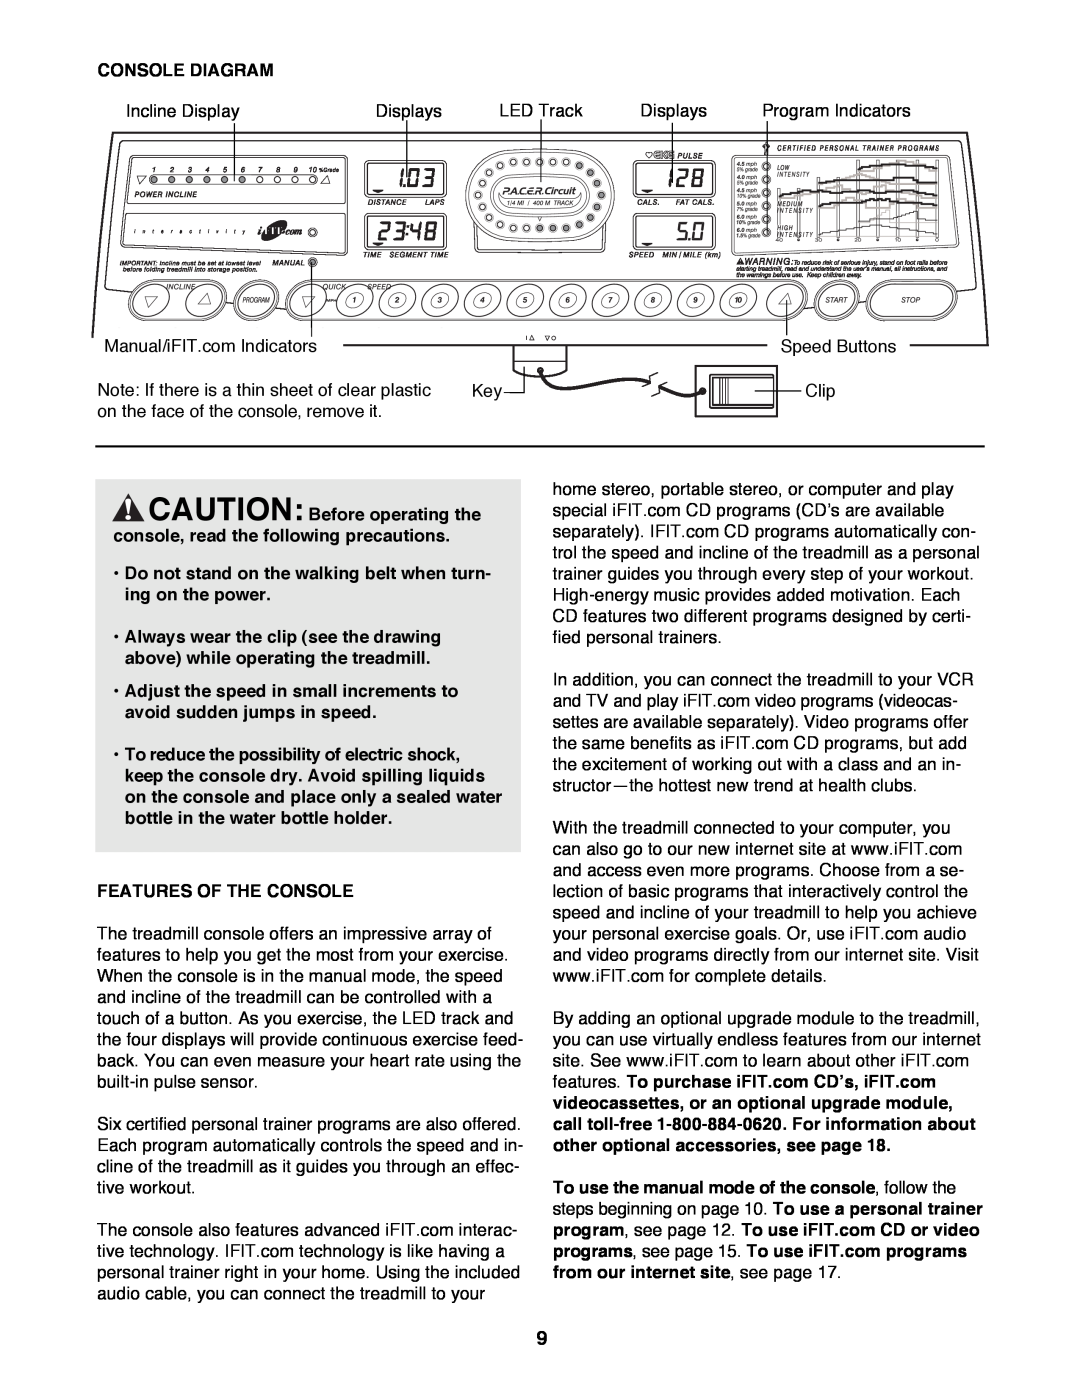 ProForm 831.299460 user manual Console Diagram, CAUTION Before operating the console, read the following precautions 